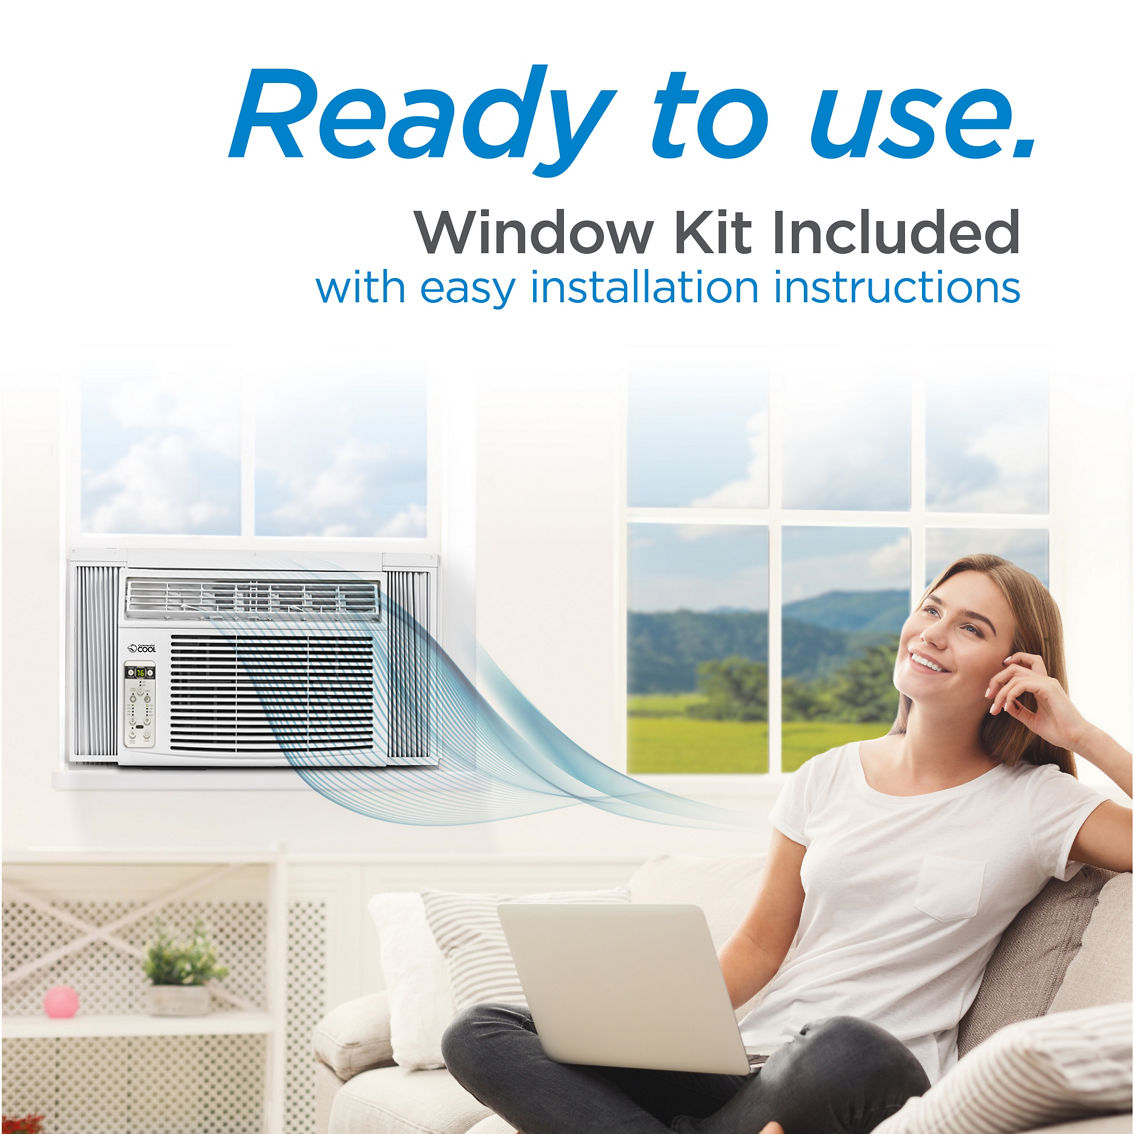 Commercial Cool 10, 000 BTU Window Air Conditioner - Image 6 of 7